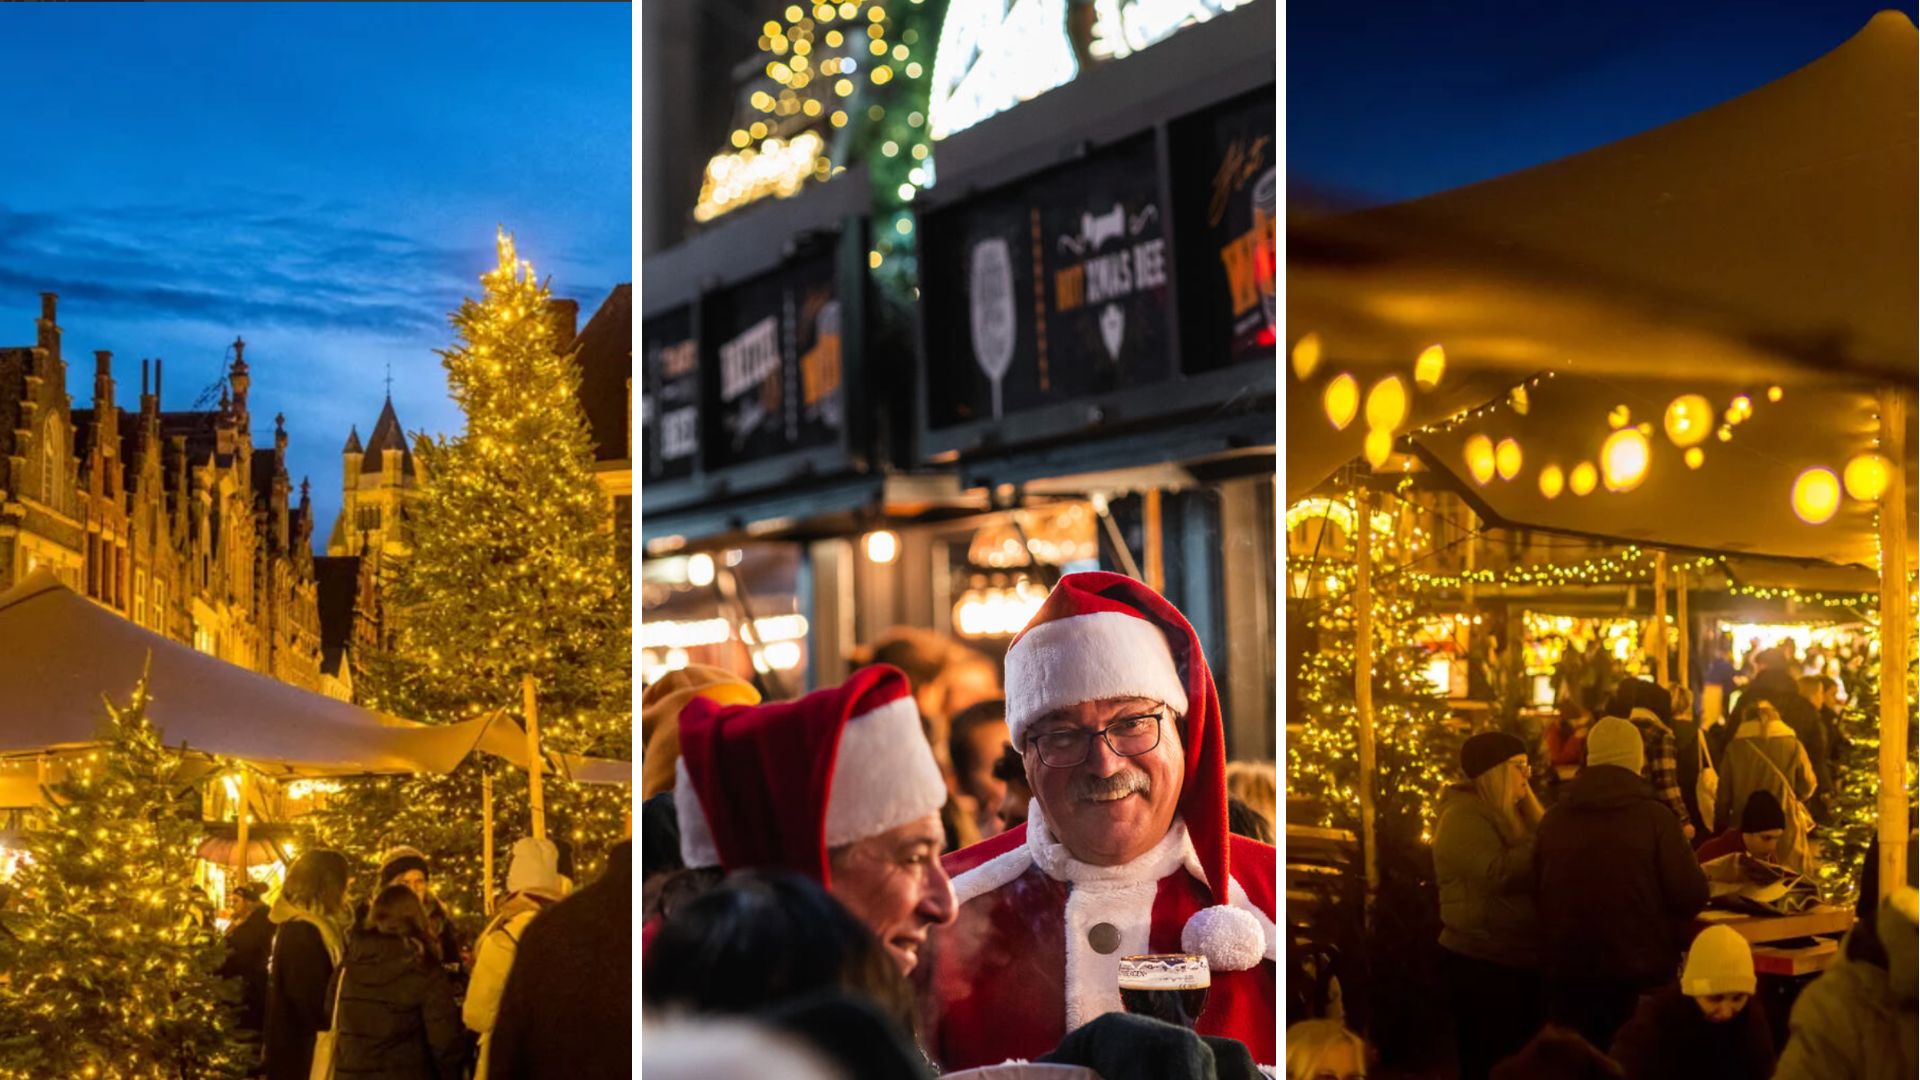 A festive guide to Christmas markets in Belgium and beyond